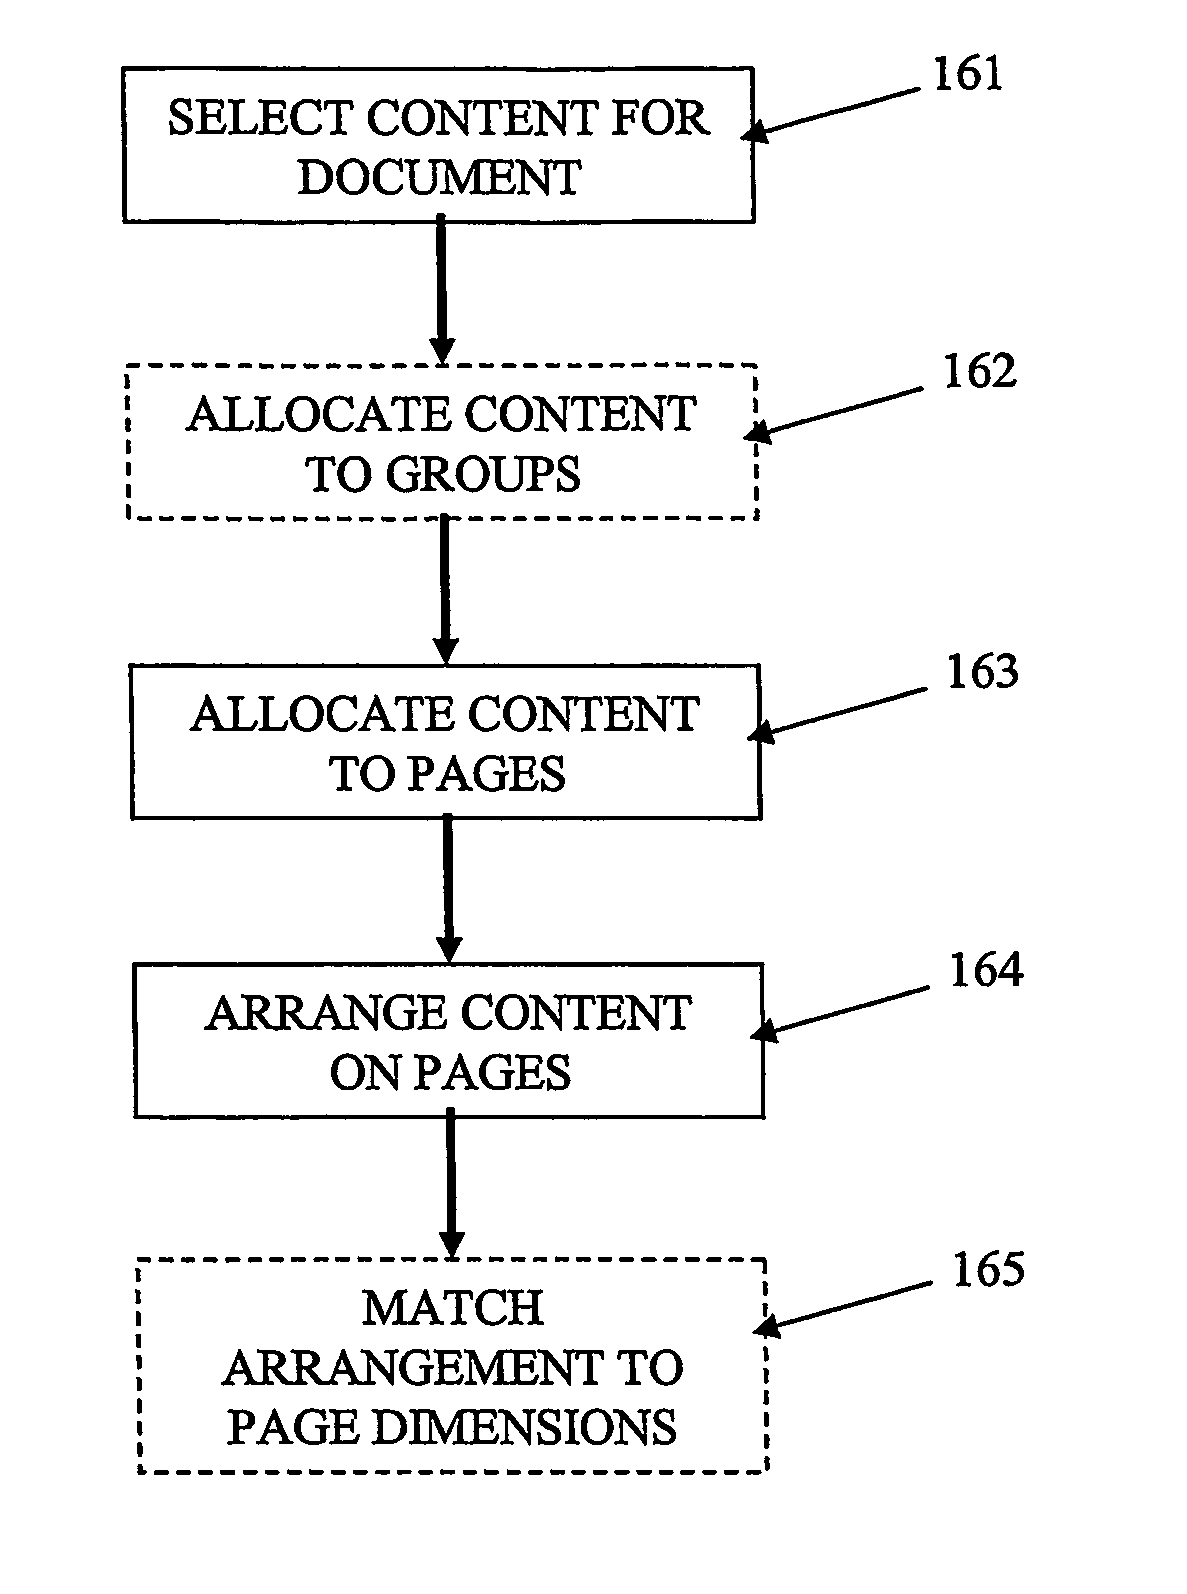 Constrained document layout